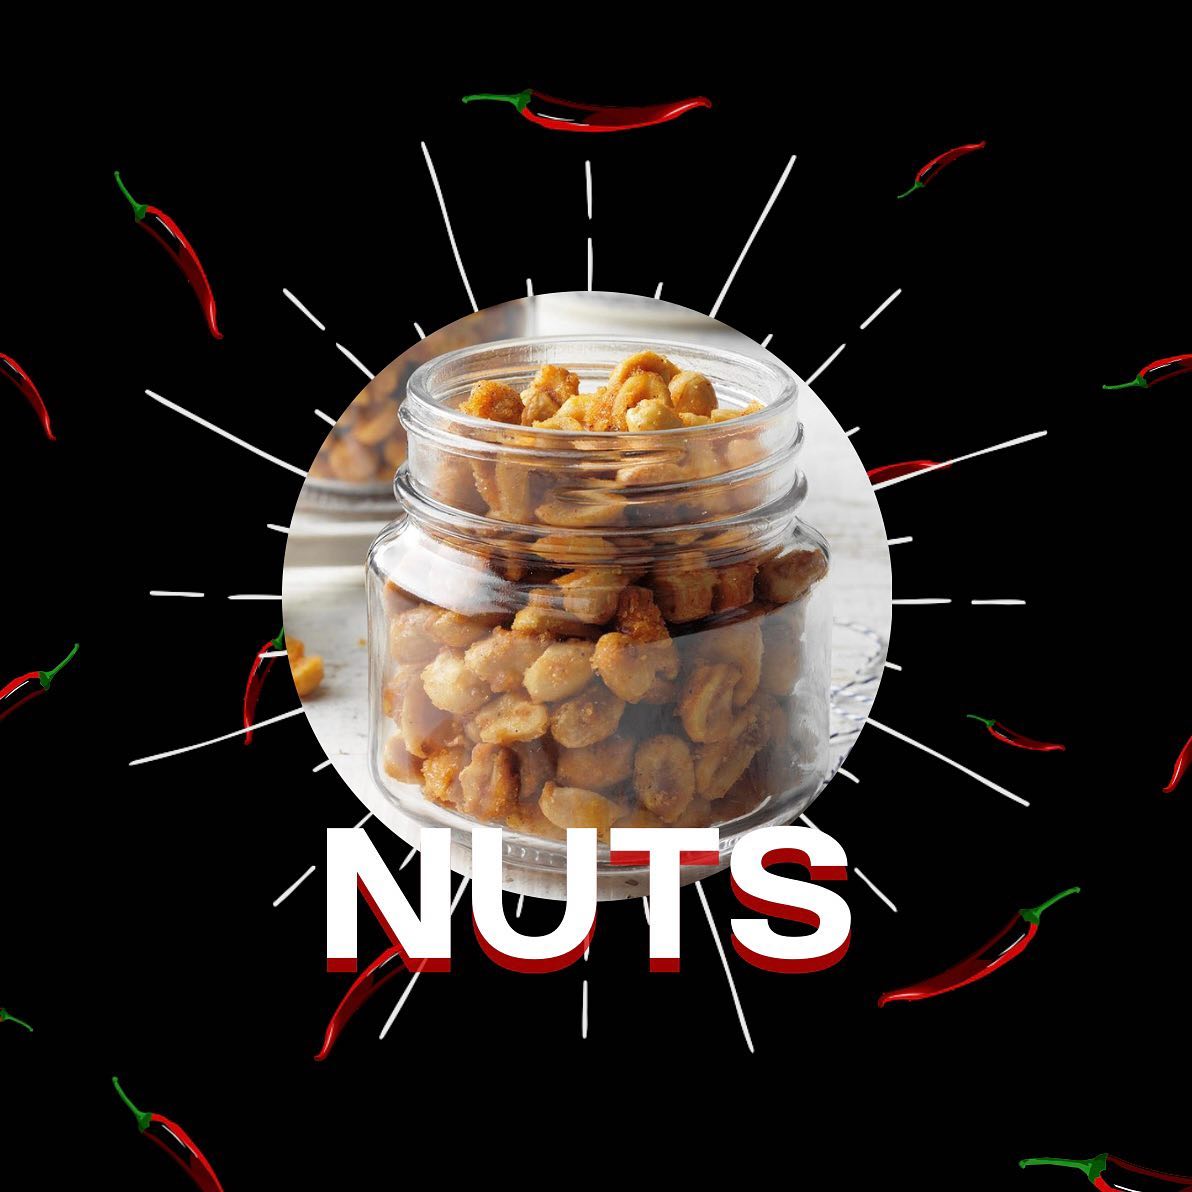 Turn Up the Heat on Your Snacking Game with Little Red's Spicy Nuts! 🌶️🥜🔥